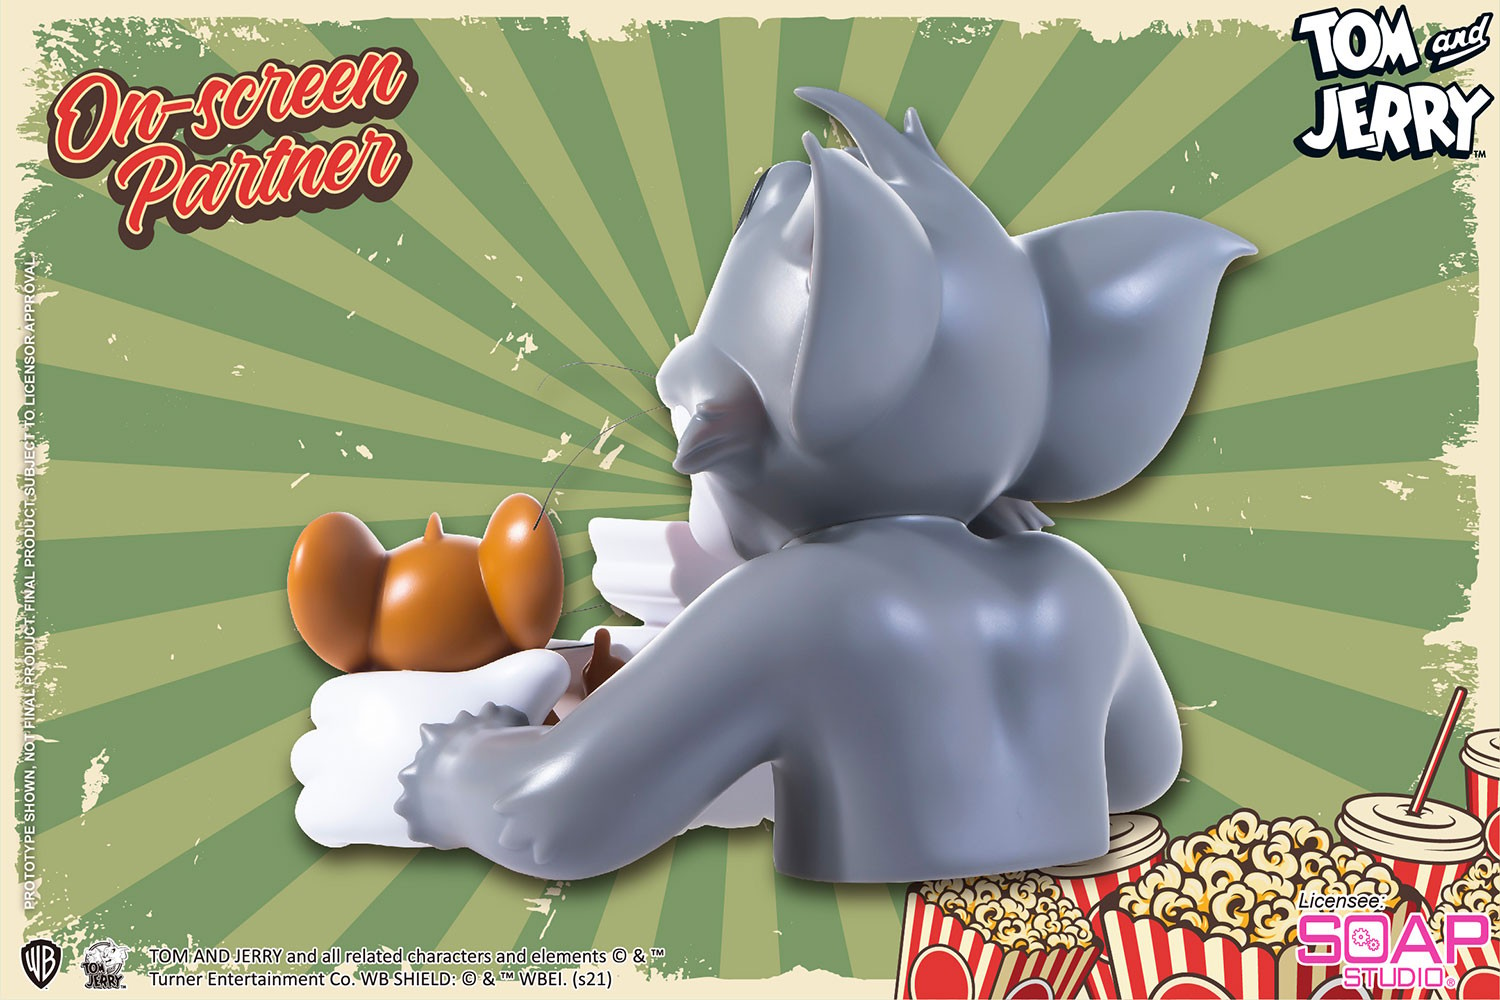 Tom and Jerry On-Screen Partner (Prototype Shown) View 6